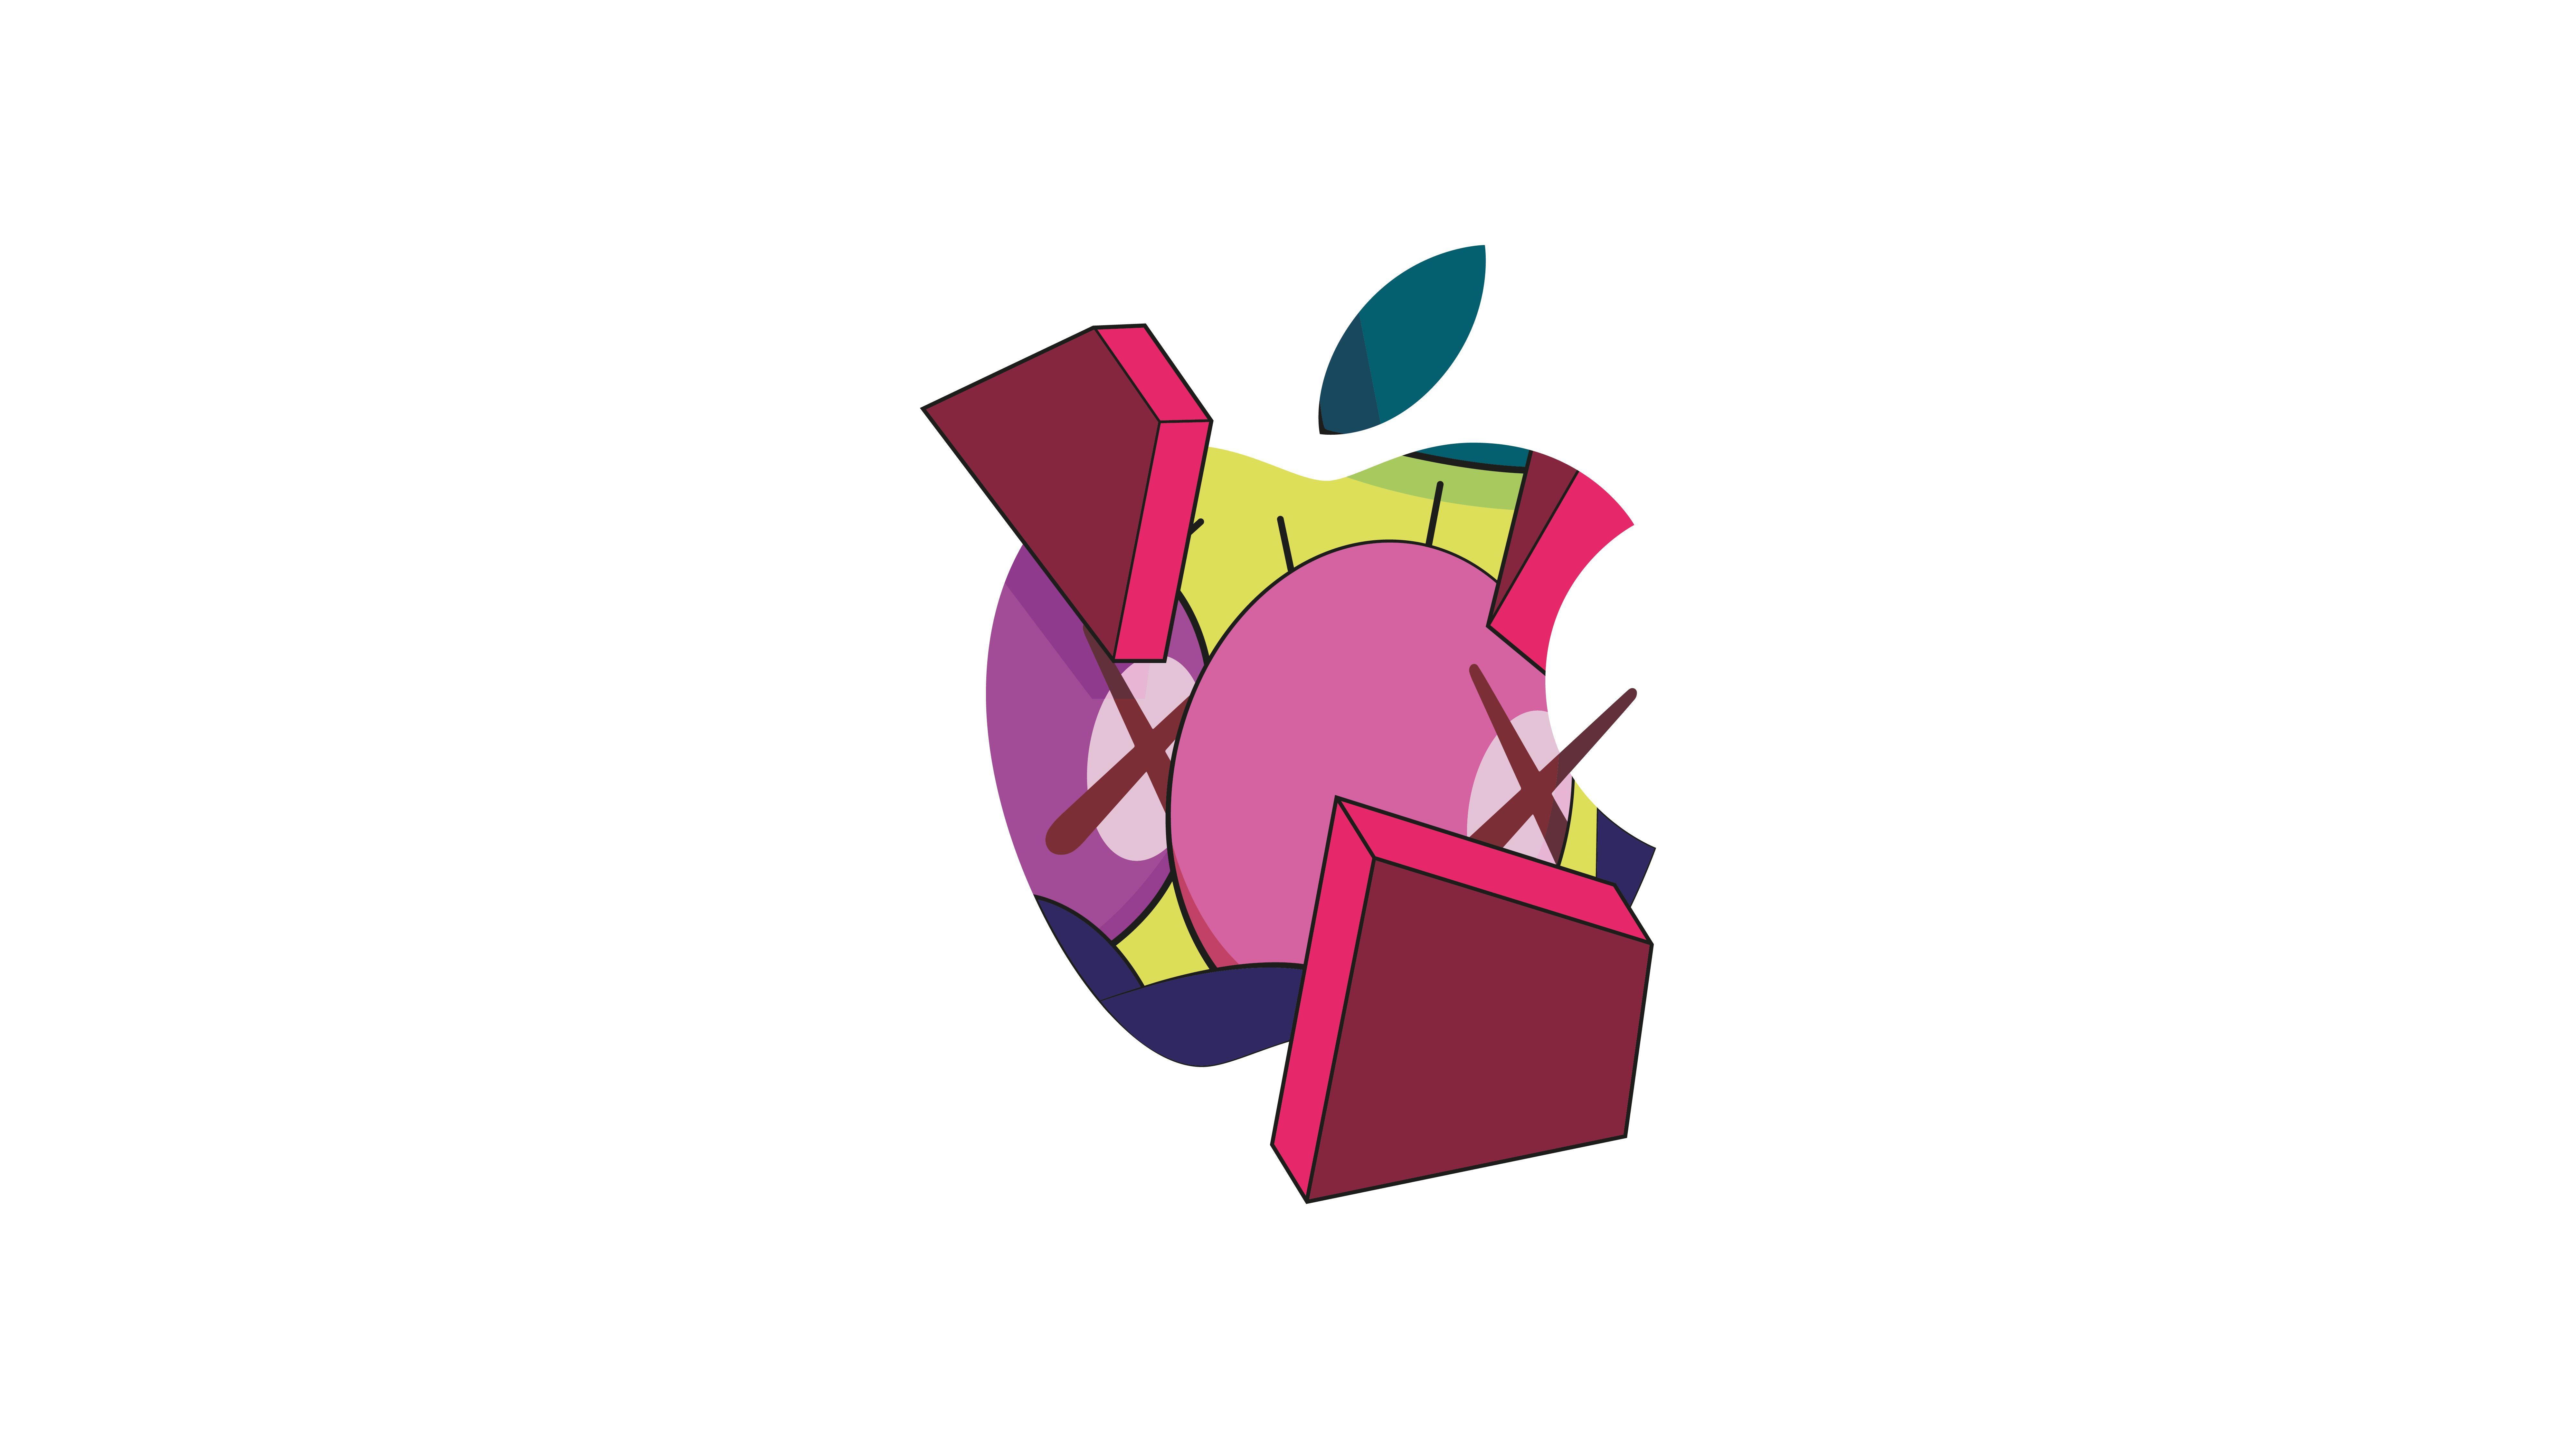 High Resolution Reddit Logo - I made a high resolution version of the KAWS Apple logo from the ...